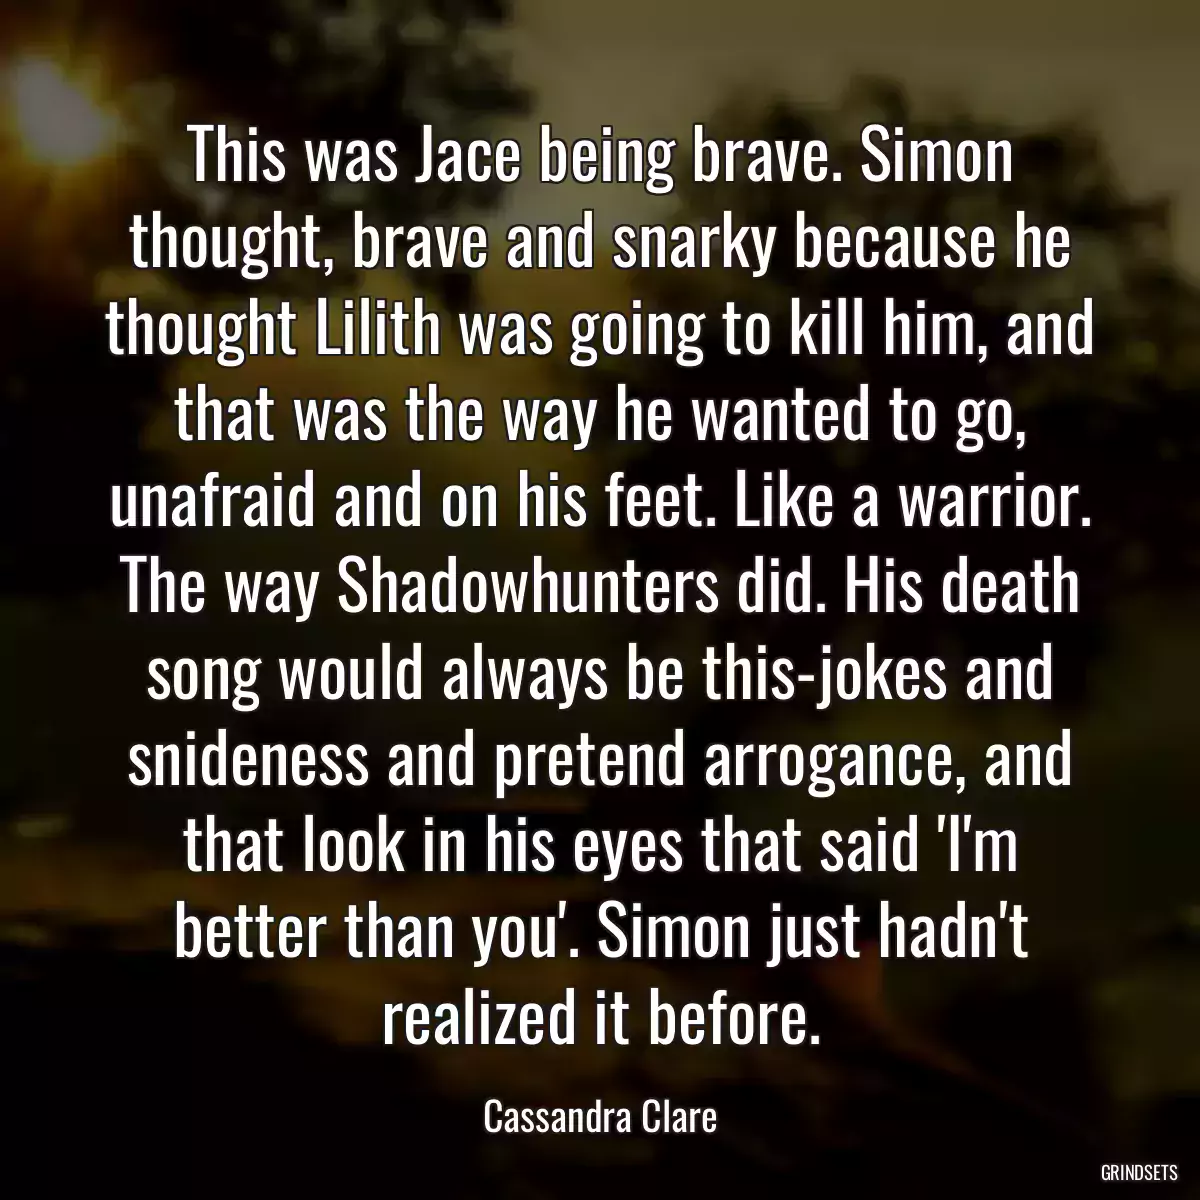 This was Jace being brave. Simon thought, brave and snarky because he thought Lilith was going to kill him, and that was the way he wanted to go, unafraid and on his feet. Like a warrior. The way Shadowhunters did. His death song would always be this-jokes and snideness and pretend arrogance, and that look in his eyes that said \'I\'m better than you\'. Simon just hadn\'t realized it before.